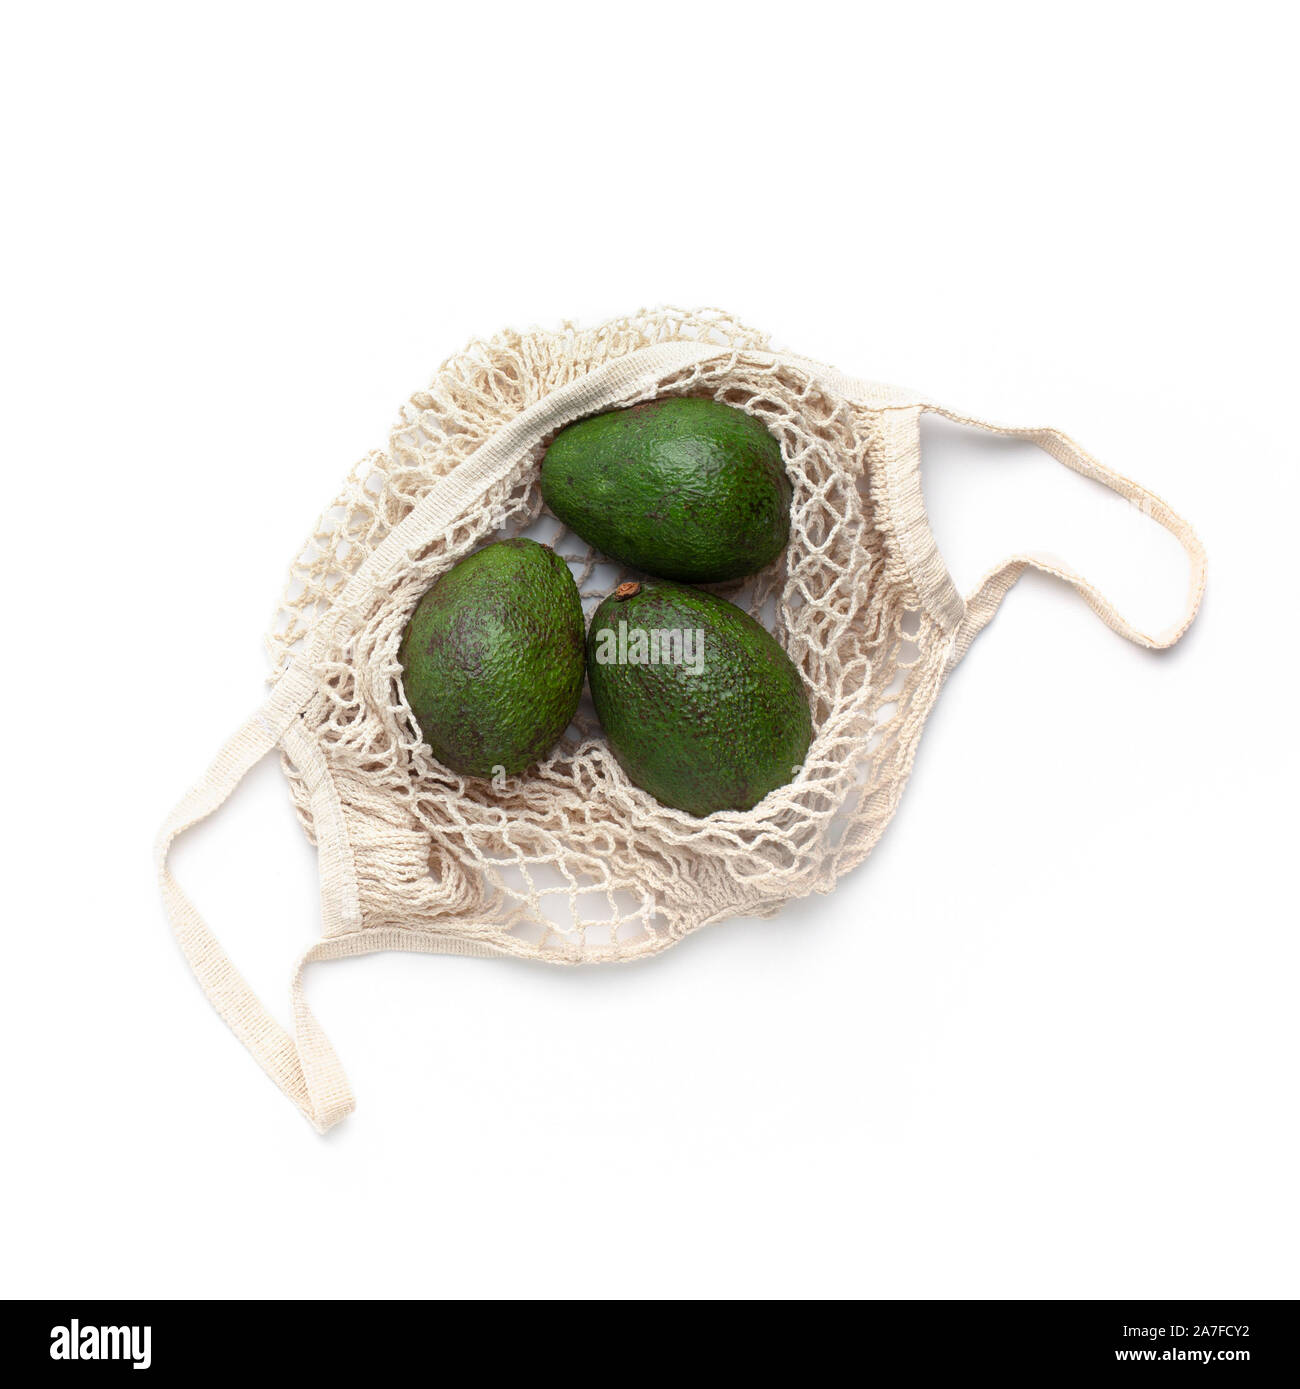 https://c8.alamy.com/comp/2A7FCY2/fresh-avocado-in-eco-bag-for-fruits-and-vegetables-2A7FCY2.jpg